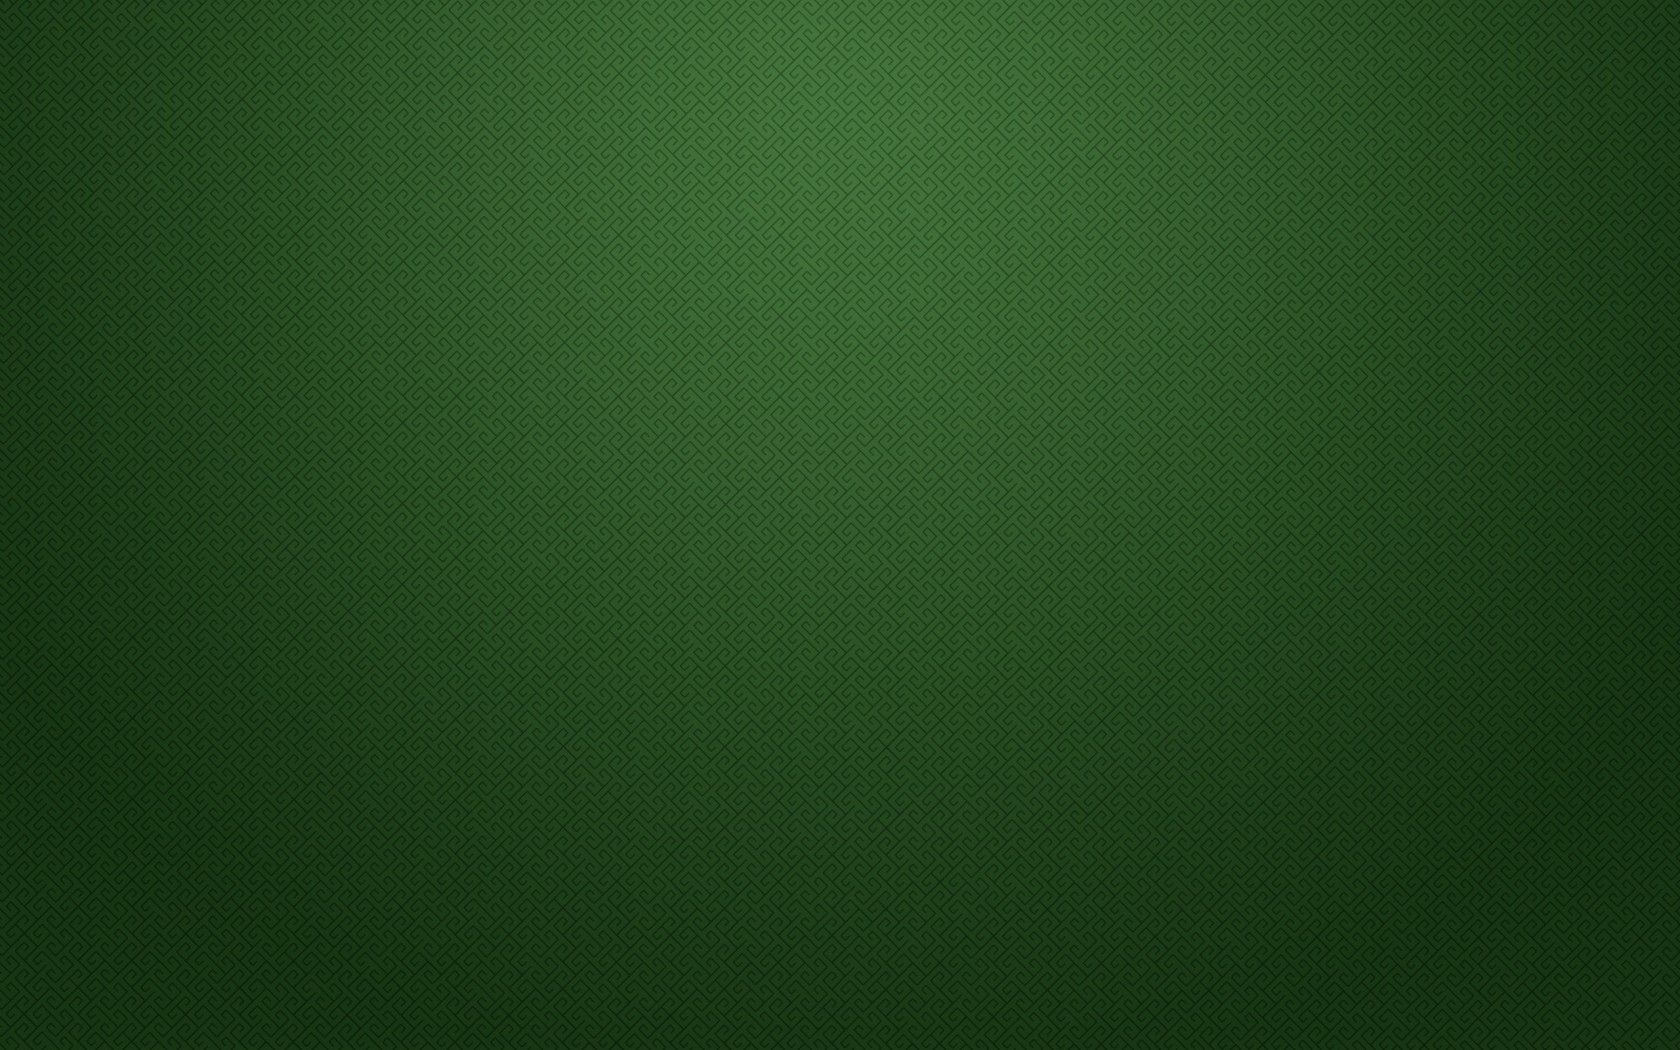 Solid Green HD Backgrounds